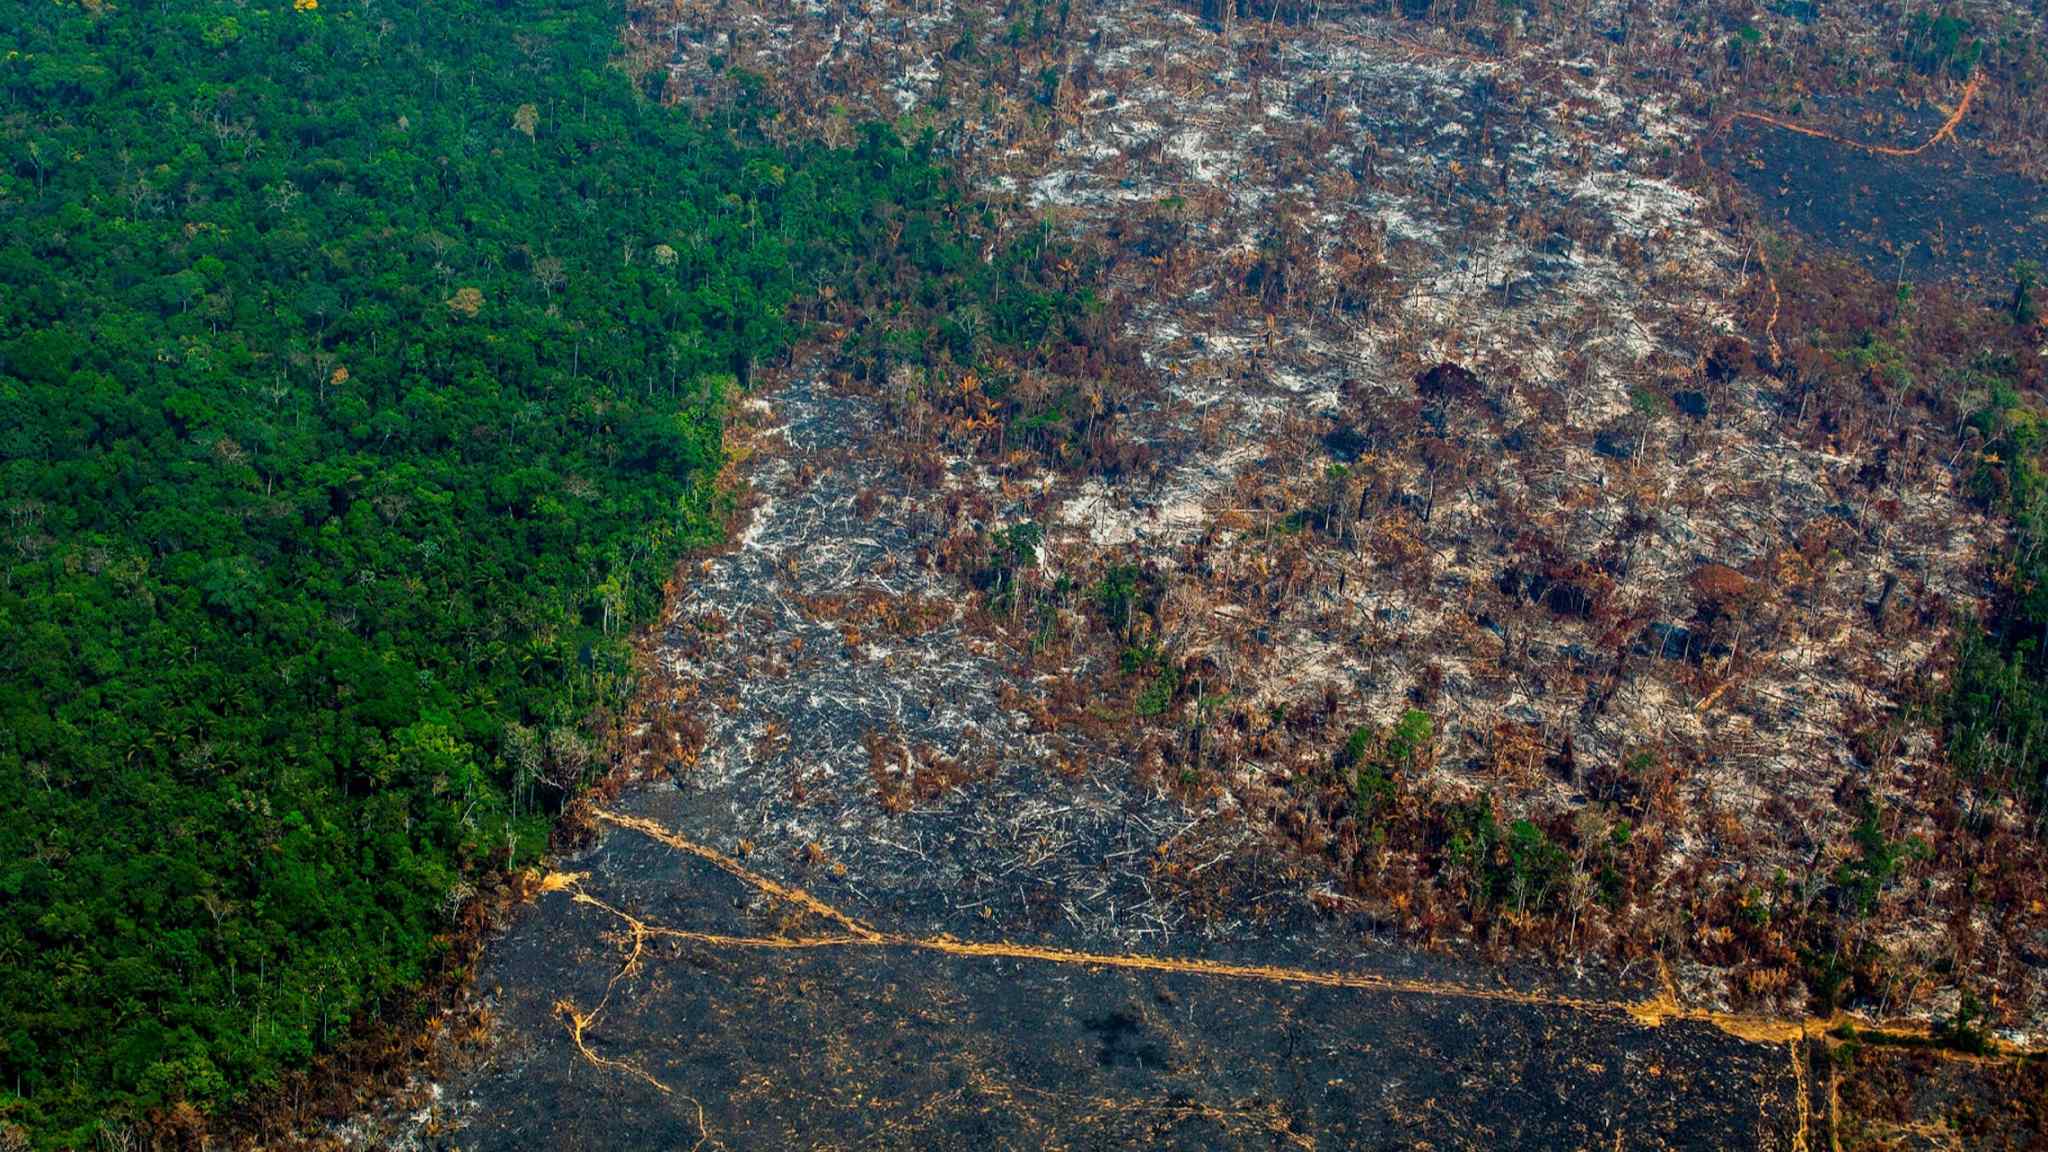 Nestlé and Unilever CEOs: we will make our supply chains deforestation-free